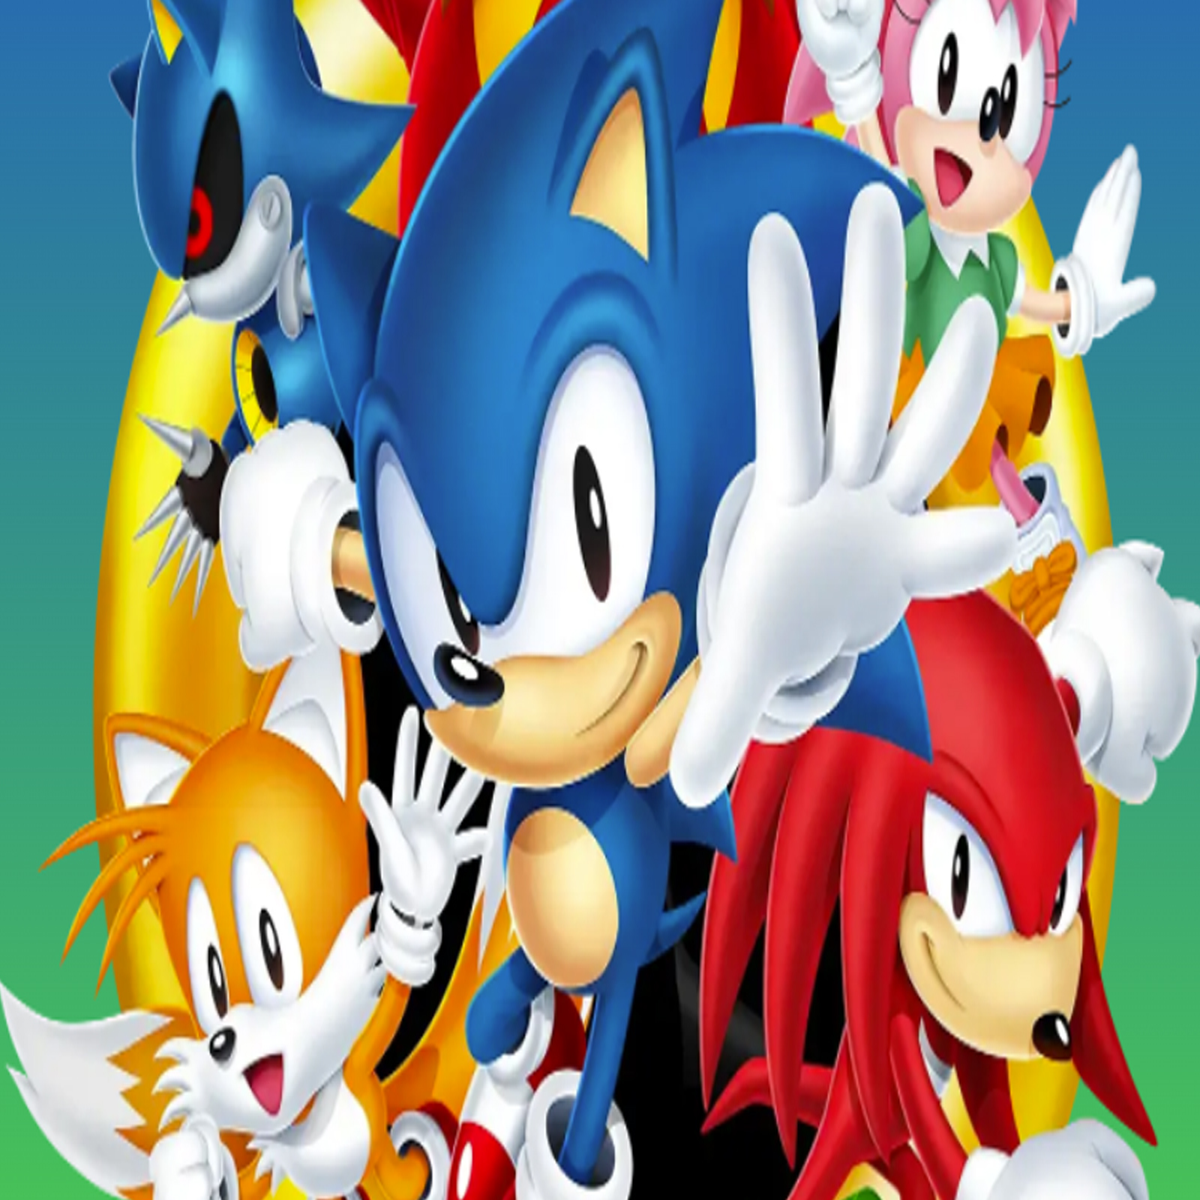 Sonic Origins  Download and Buy Today - Epic Games Store